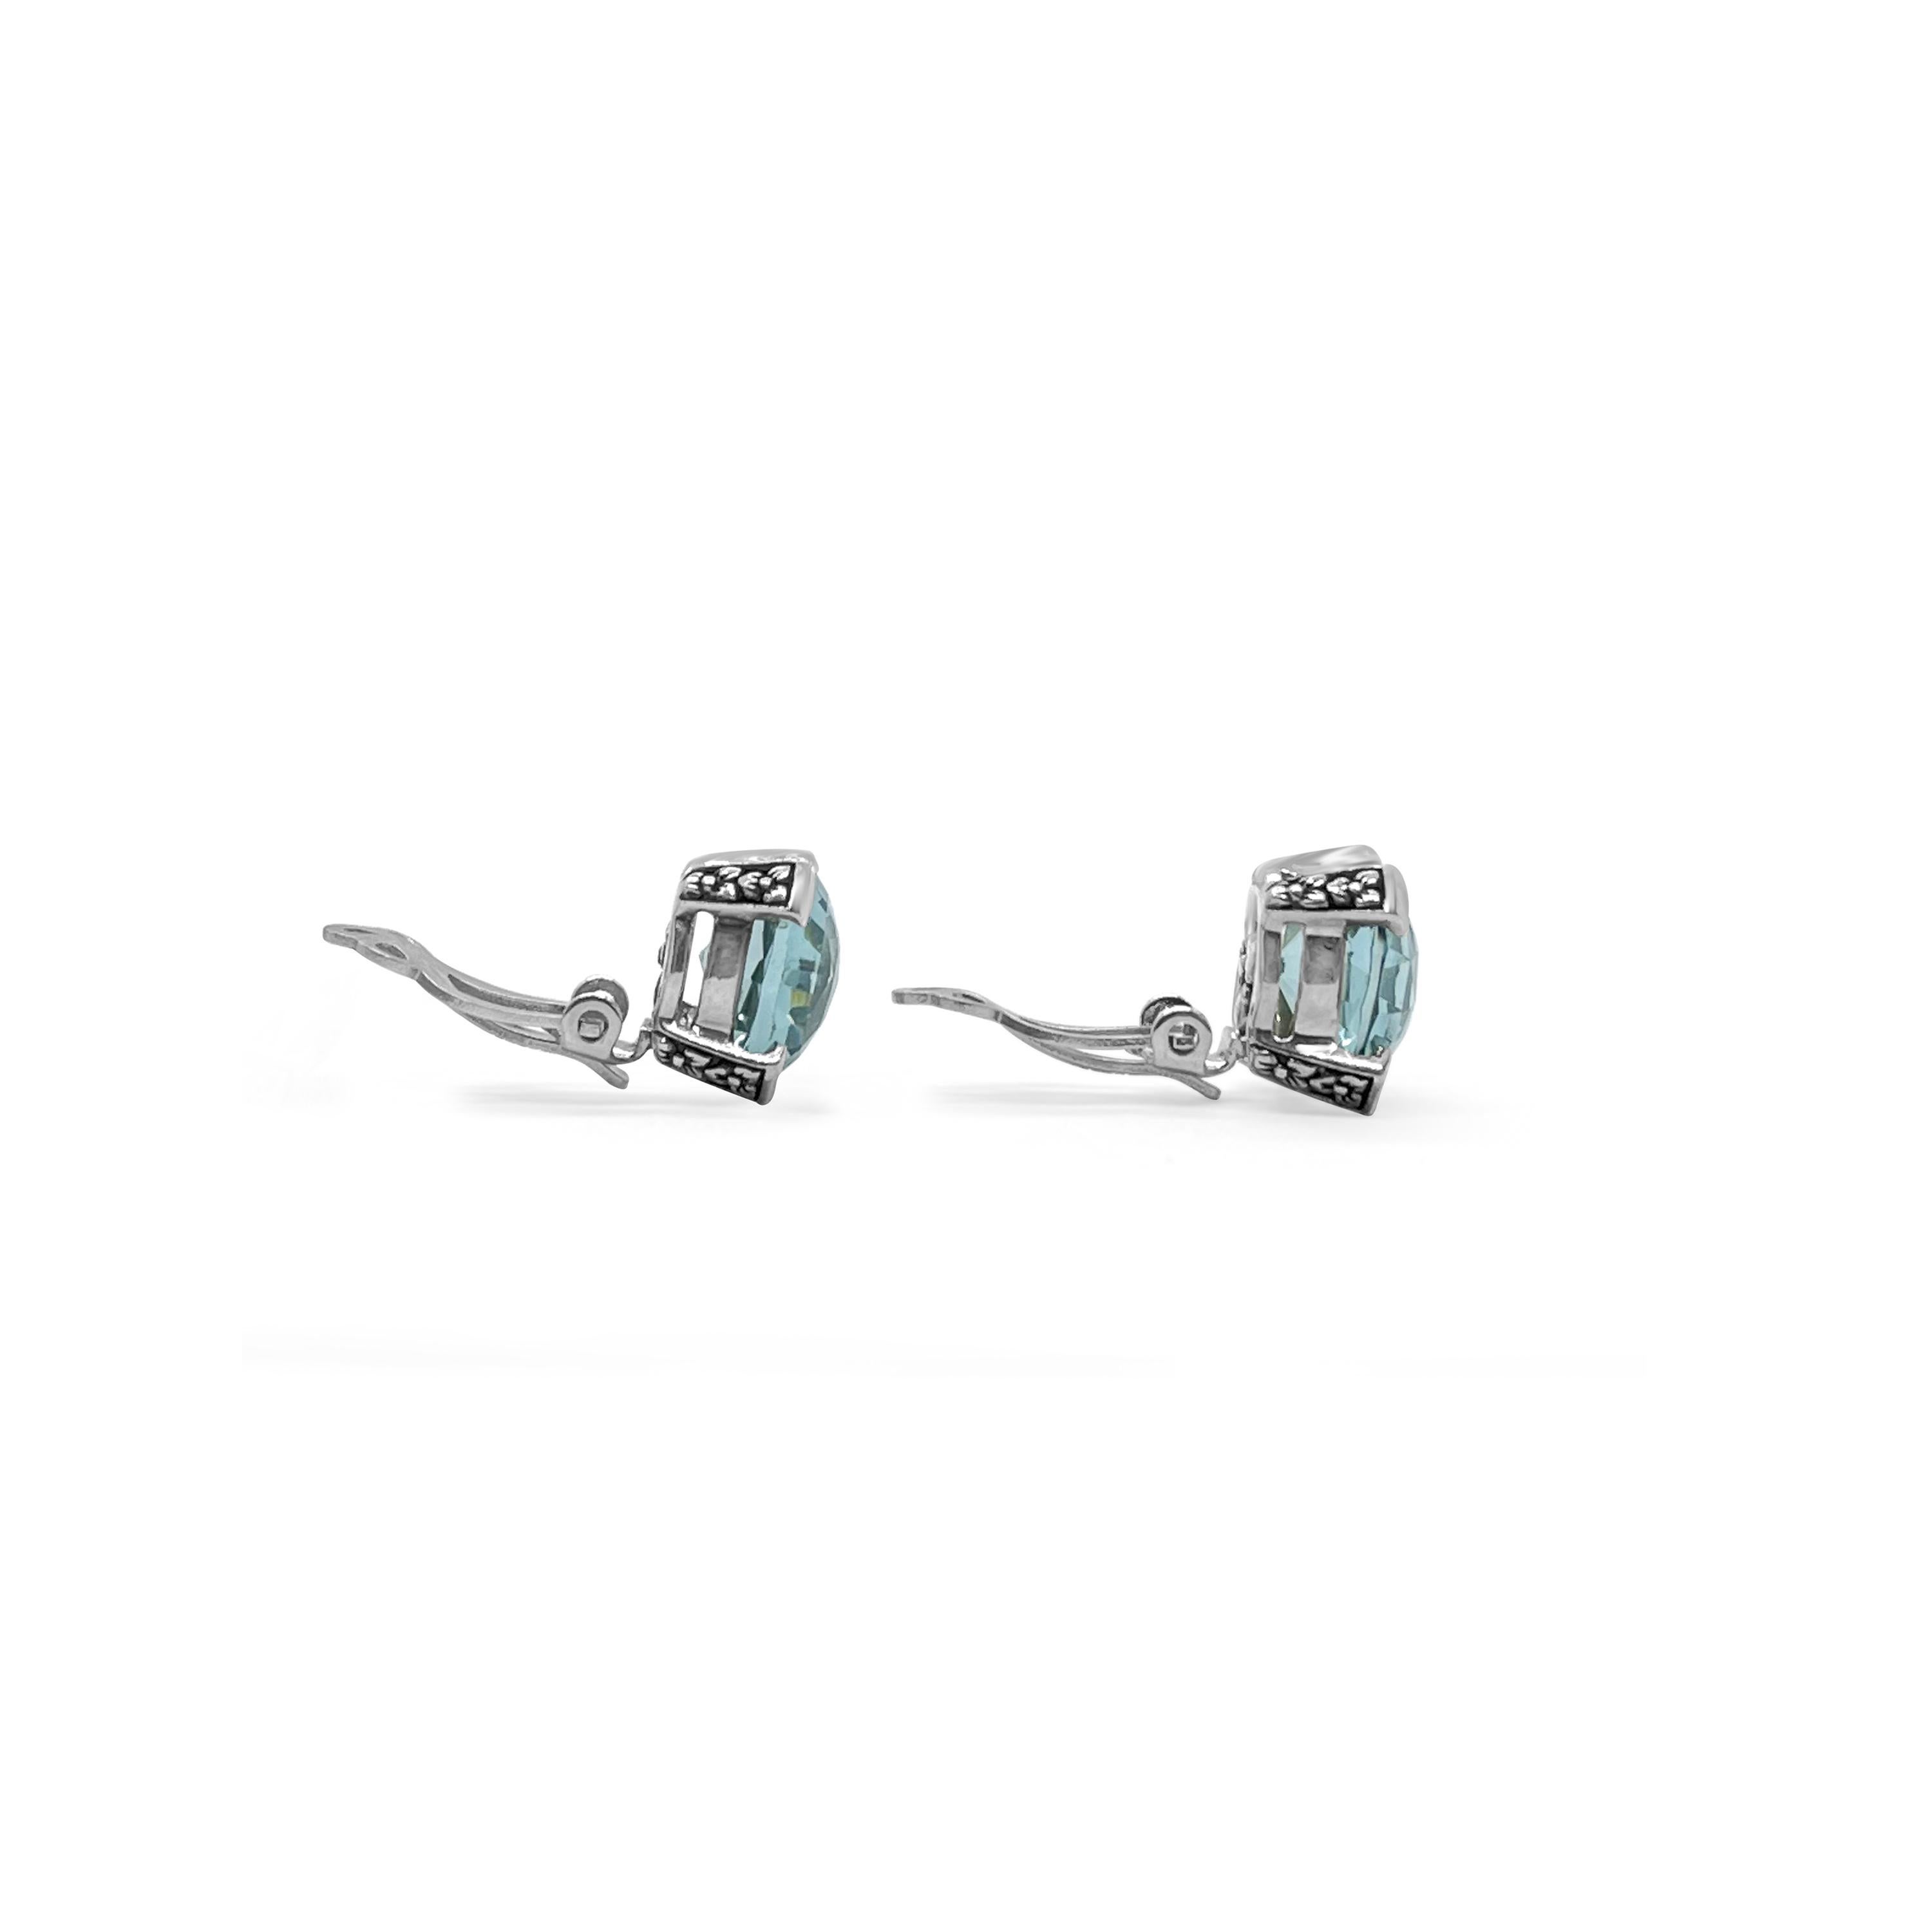 Introducing the Hydro Aquamarine Earrings in Sterling Silver, a true marvel of luxury and elegance. These exquisite earrings are a testament to the skilled craftsmanship and attention to detail of their creators, evoking a sense of timeless beauty